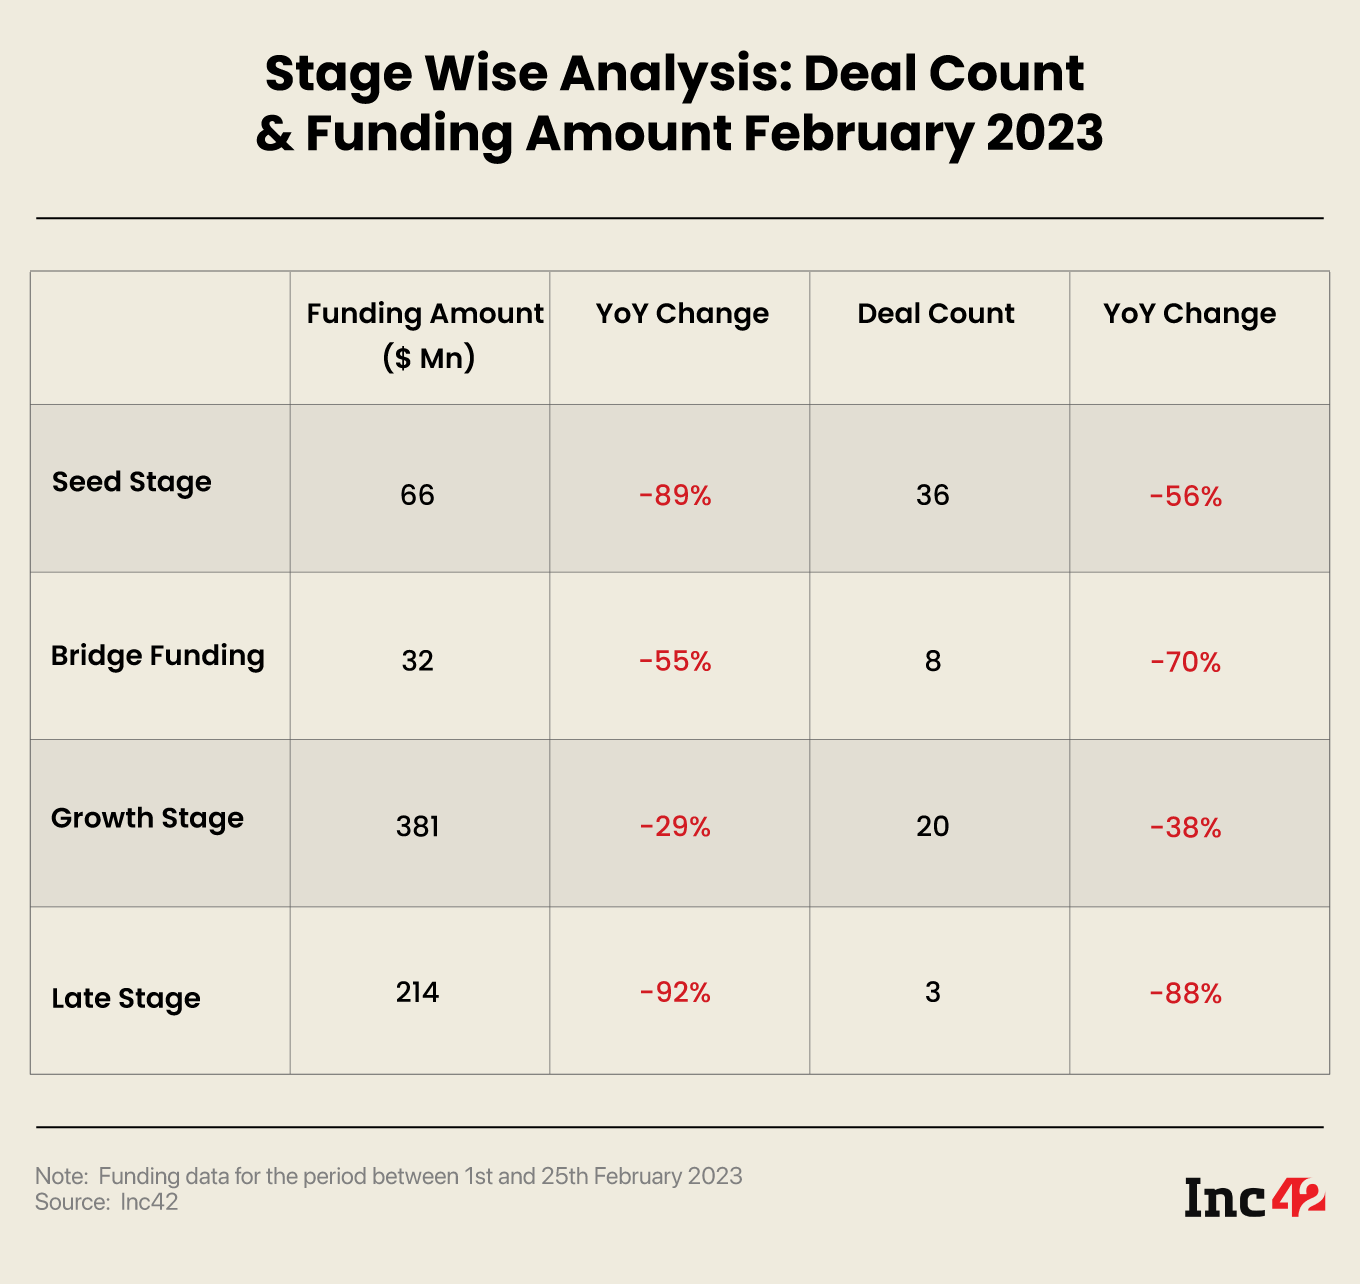 stage-wise funding breakdown for February 2023